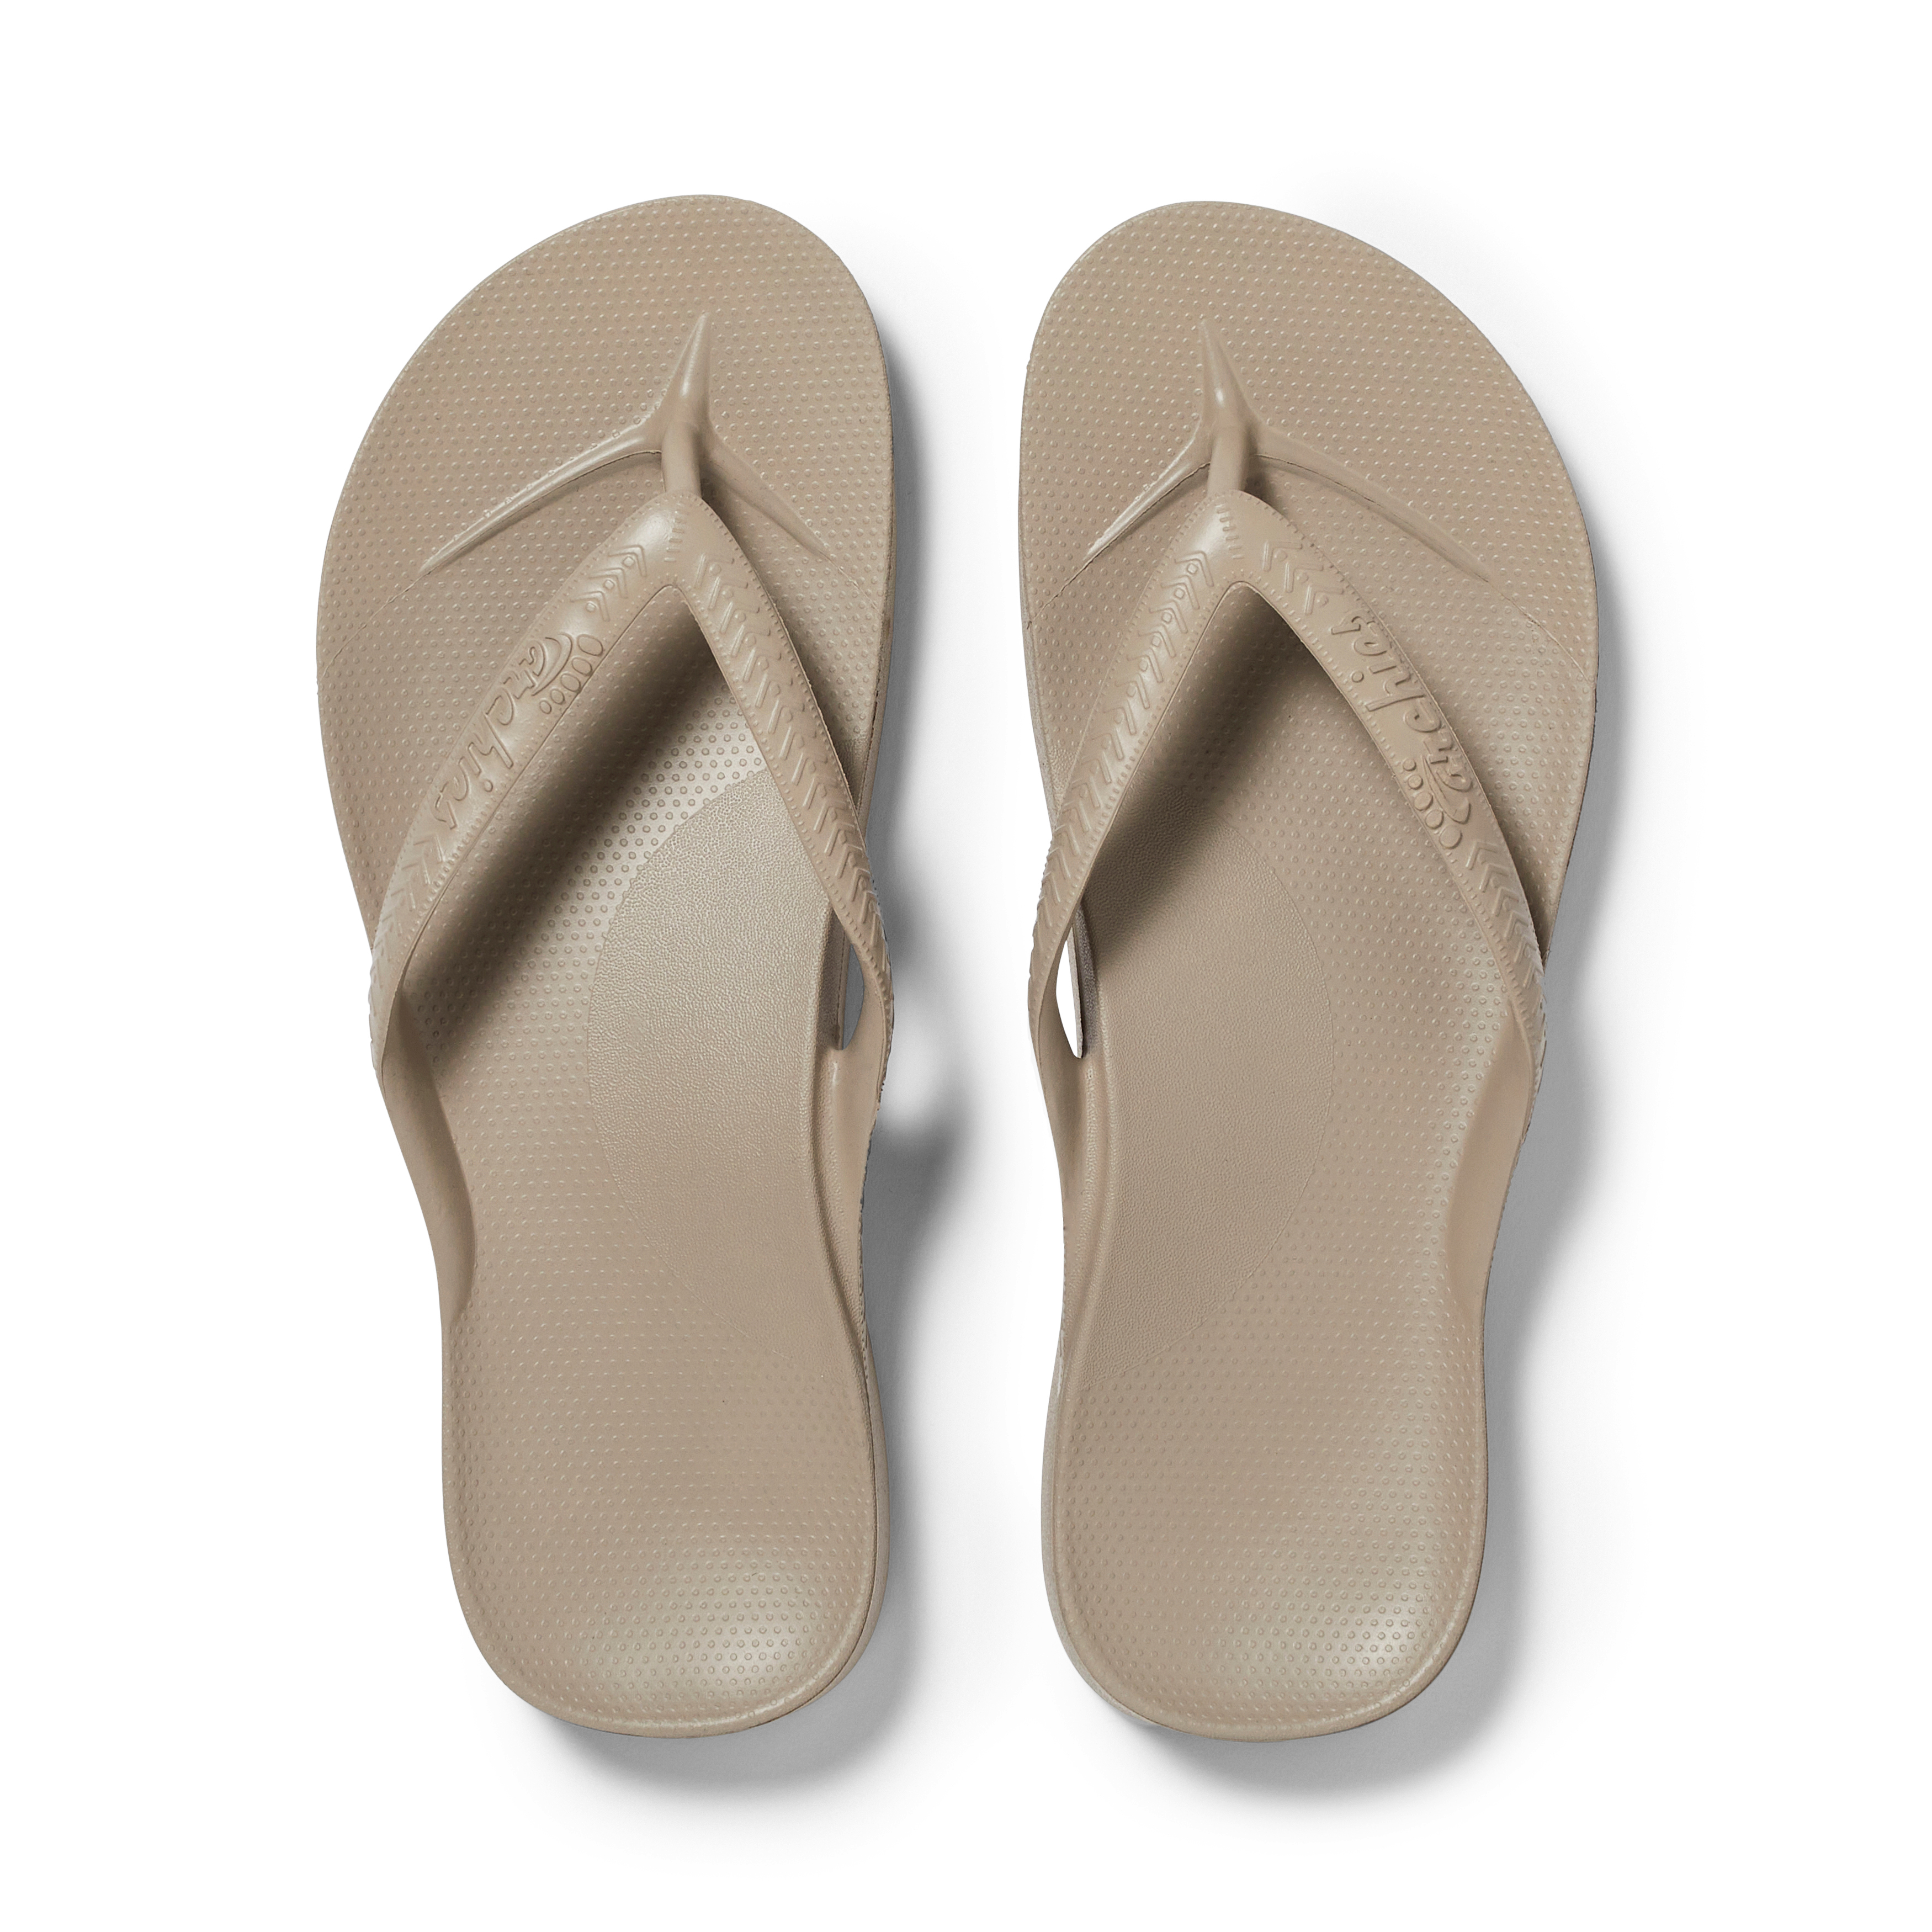 Archies Arch Support Flip Flops- Grey - Adelaide Foot and Ankle Shop